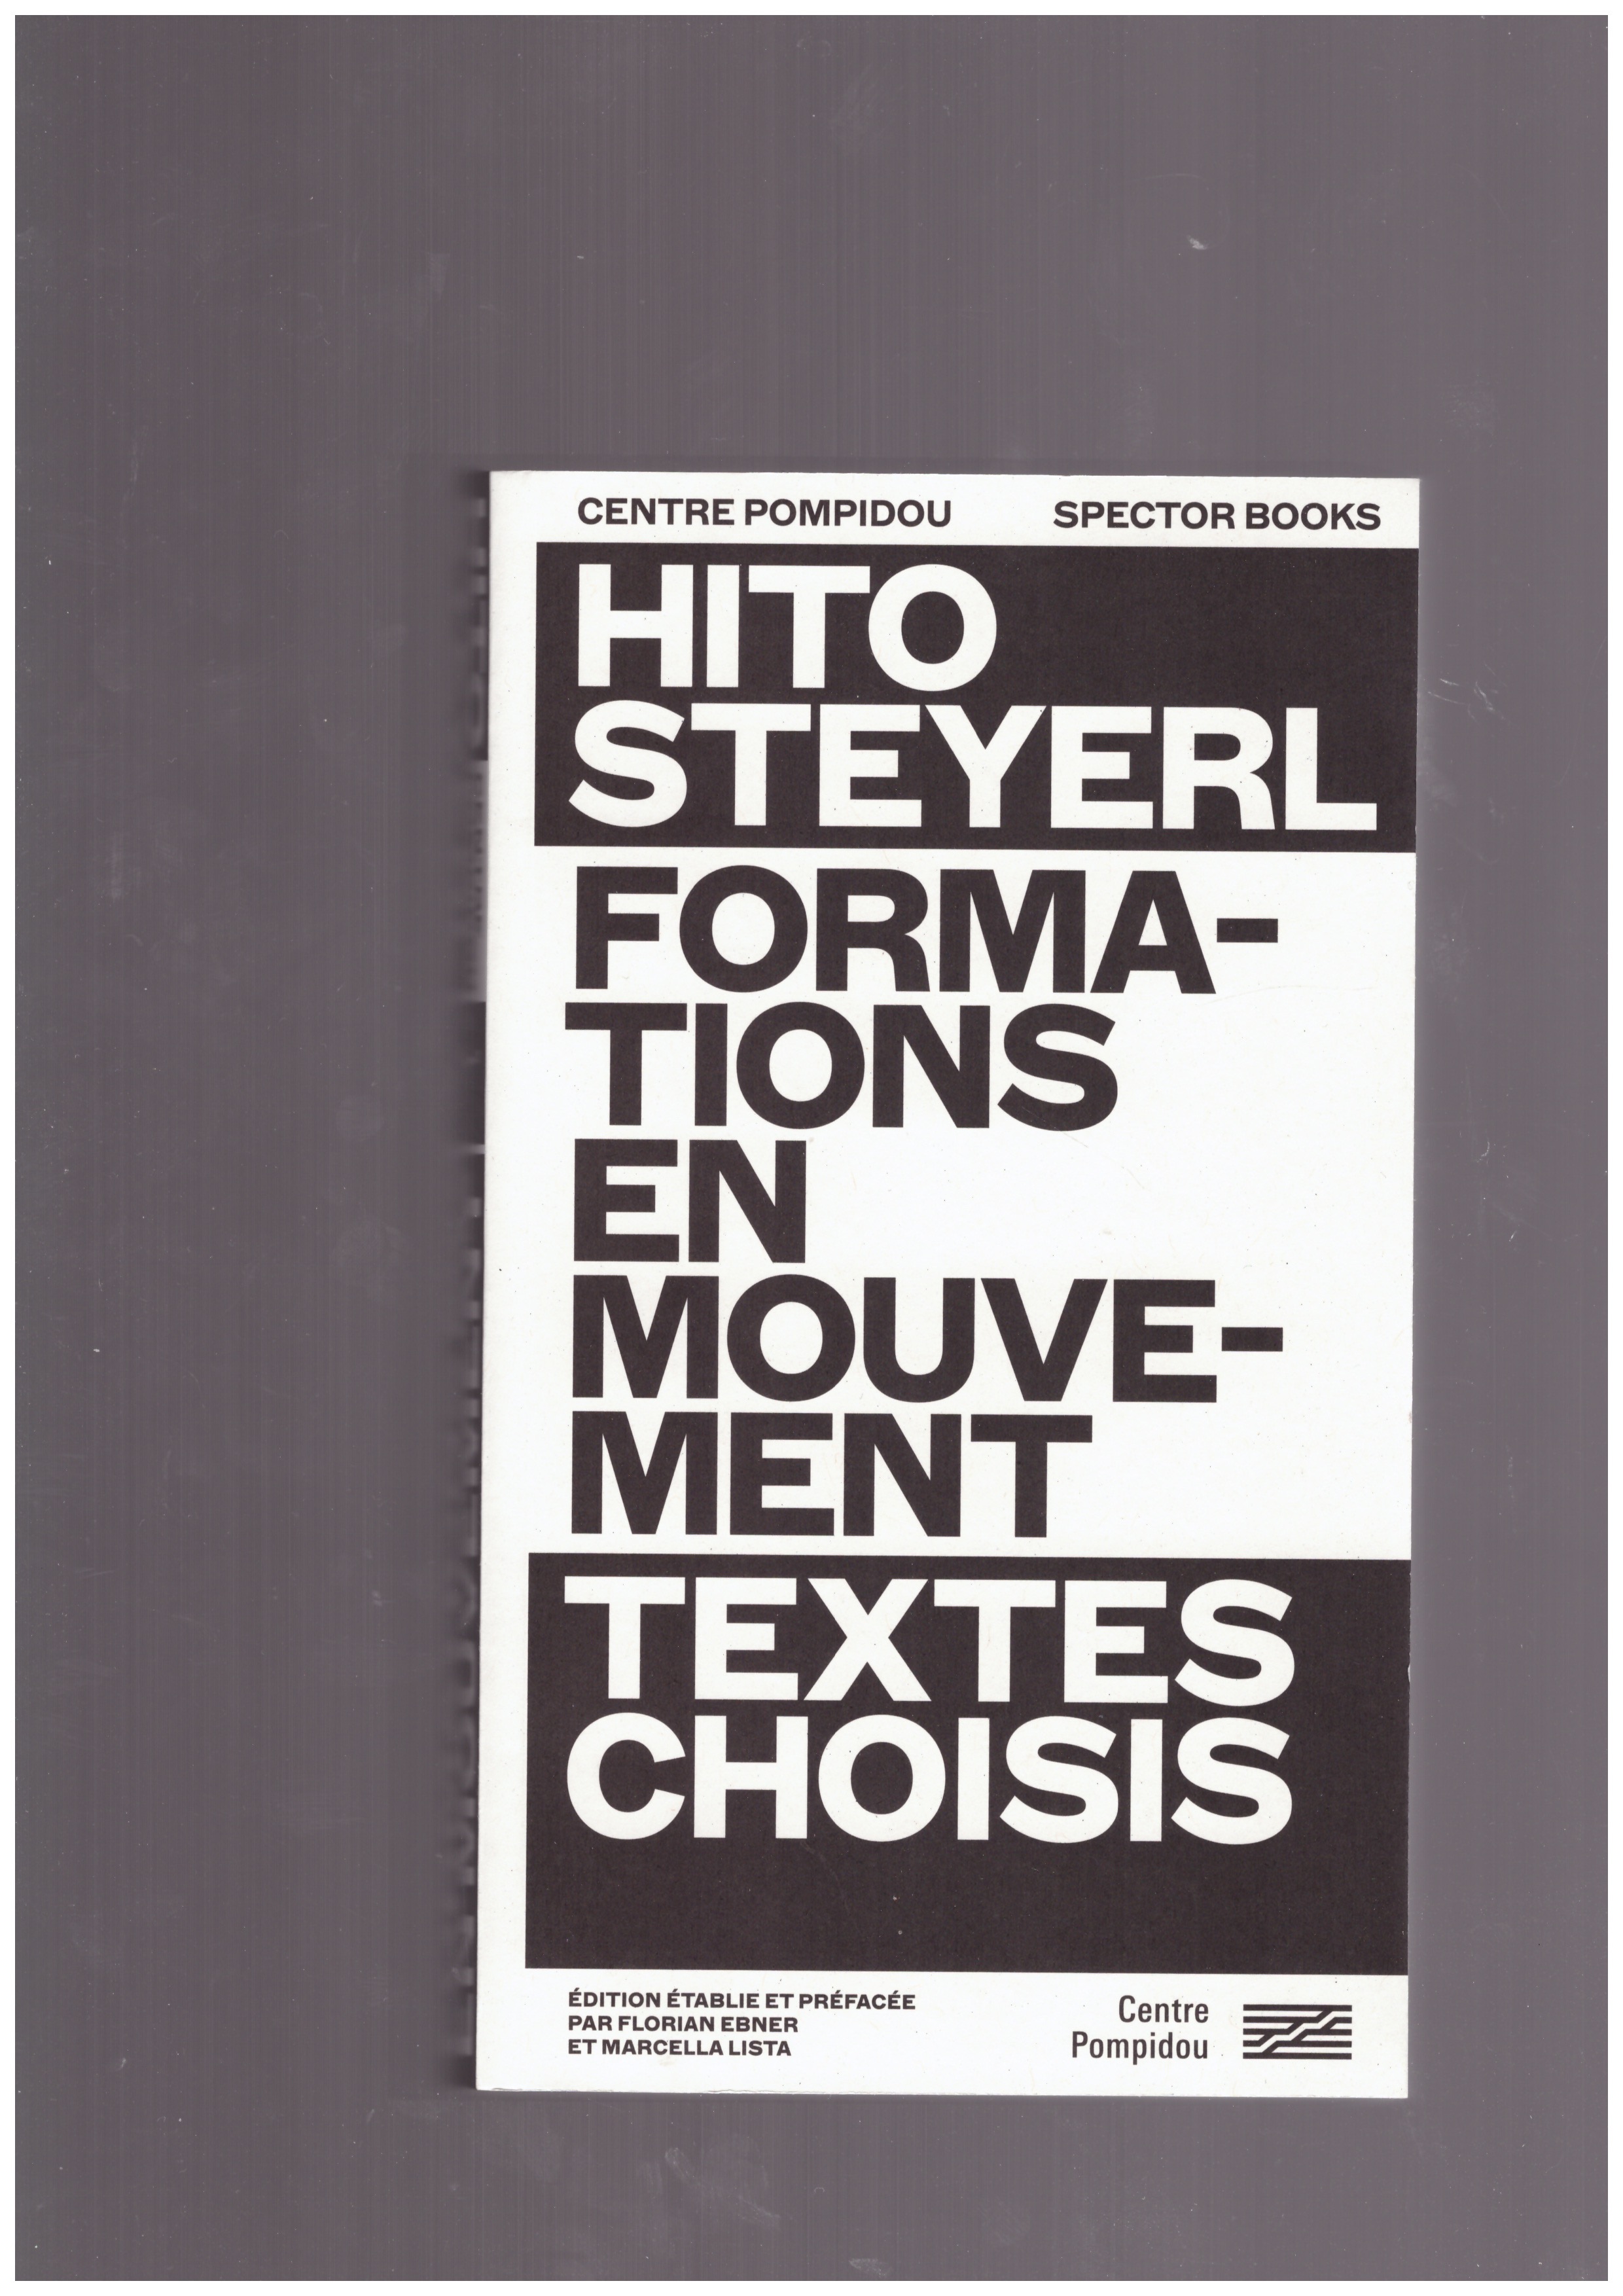 STEYERL, Hito - Formations en mouvement (textes choisis)